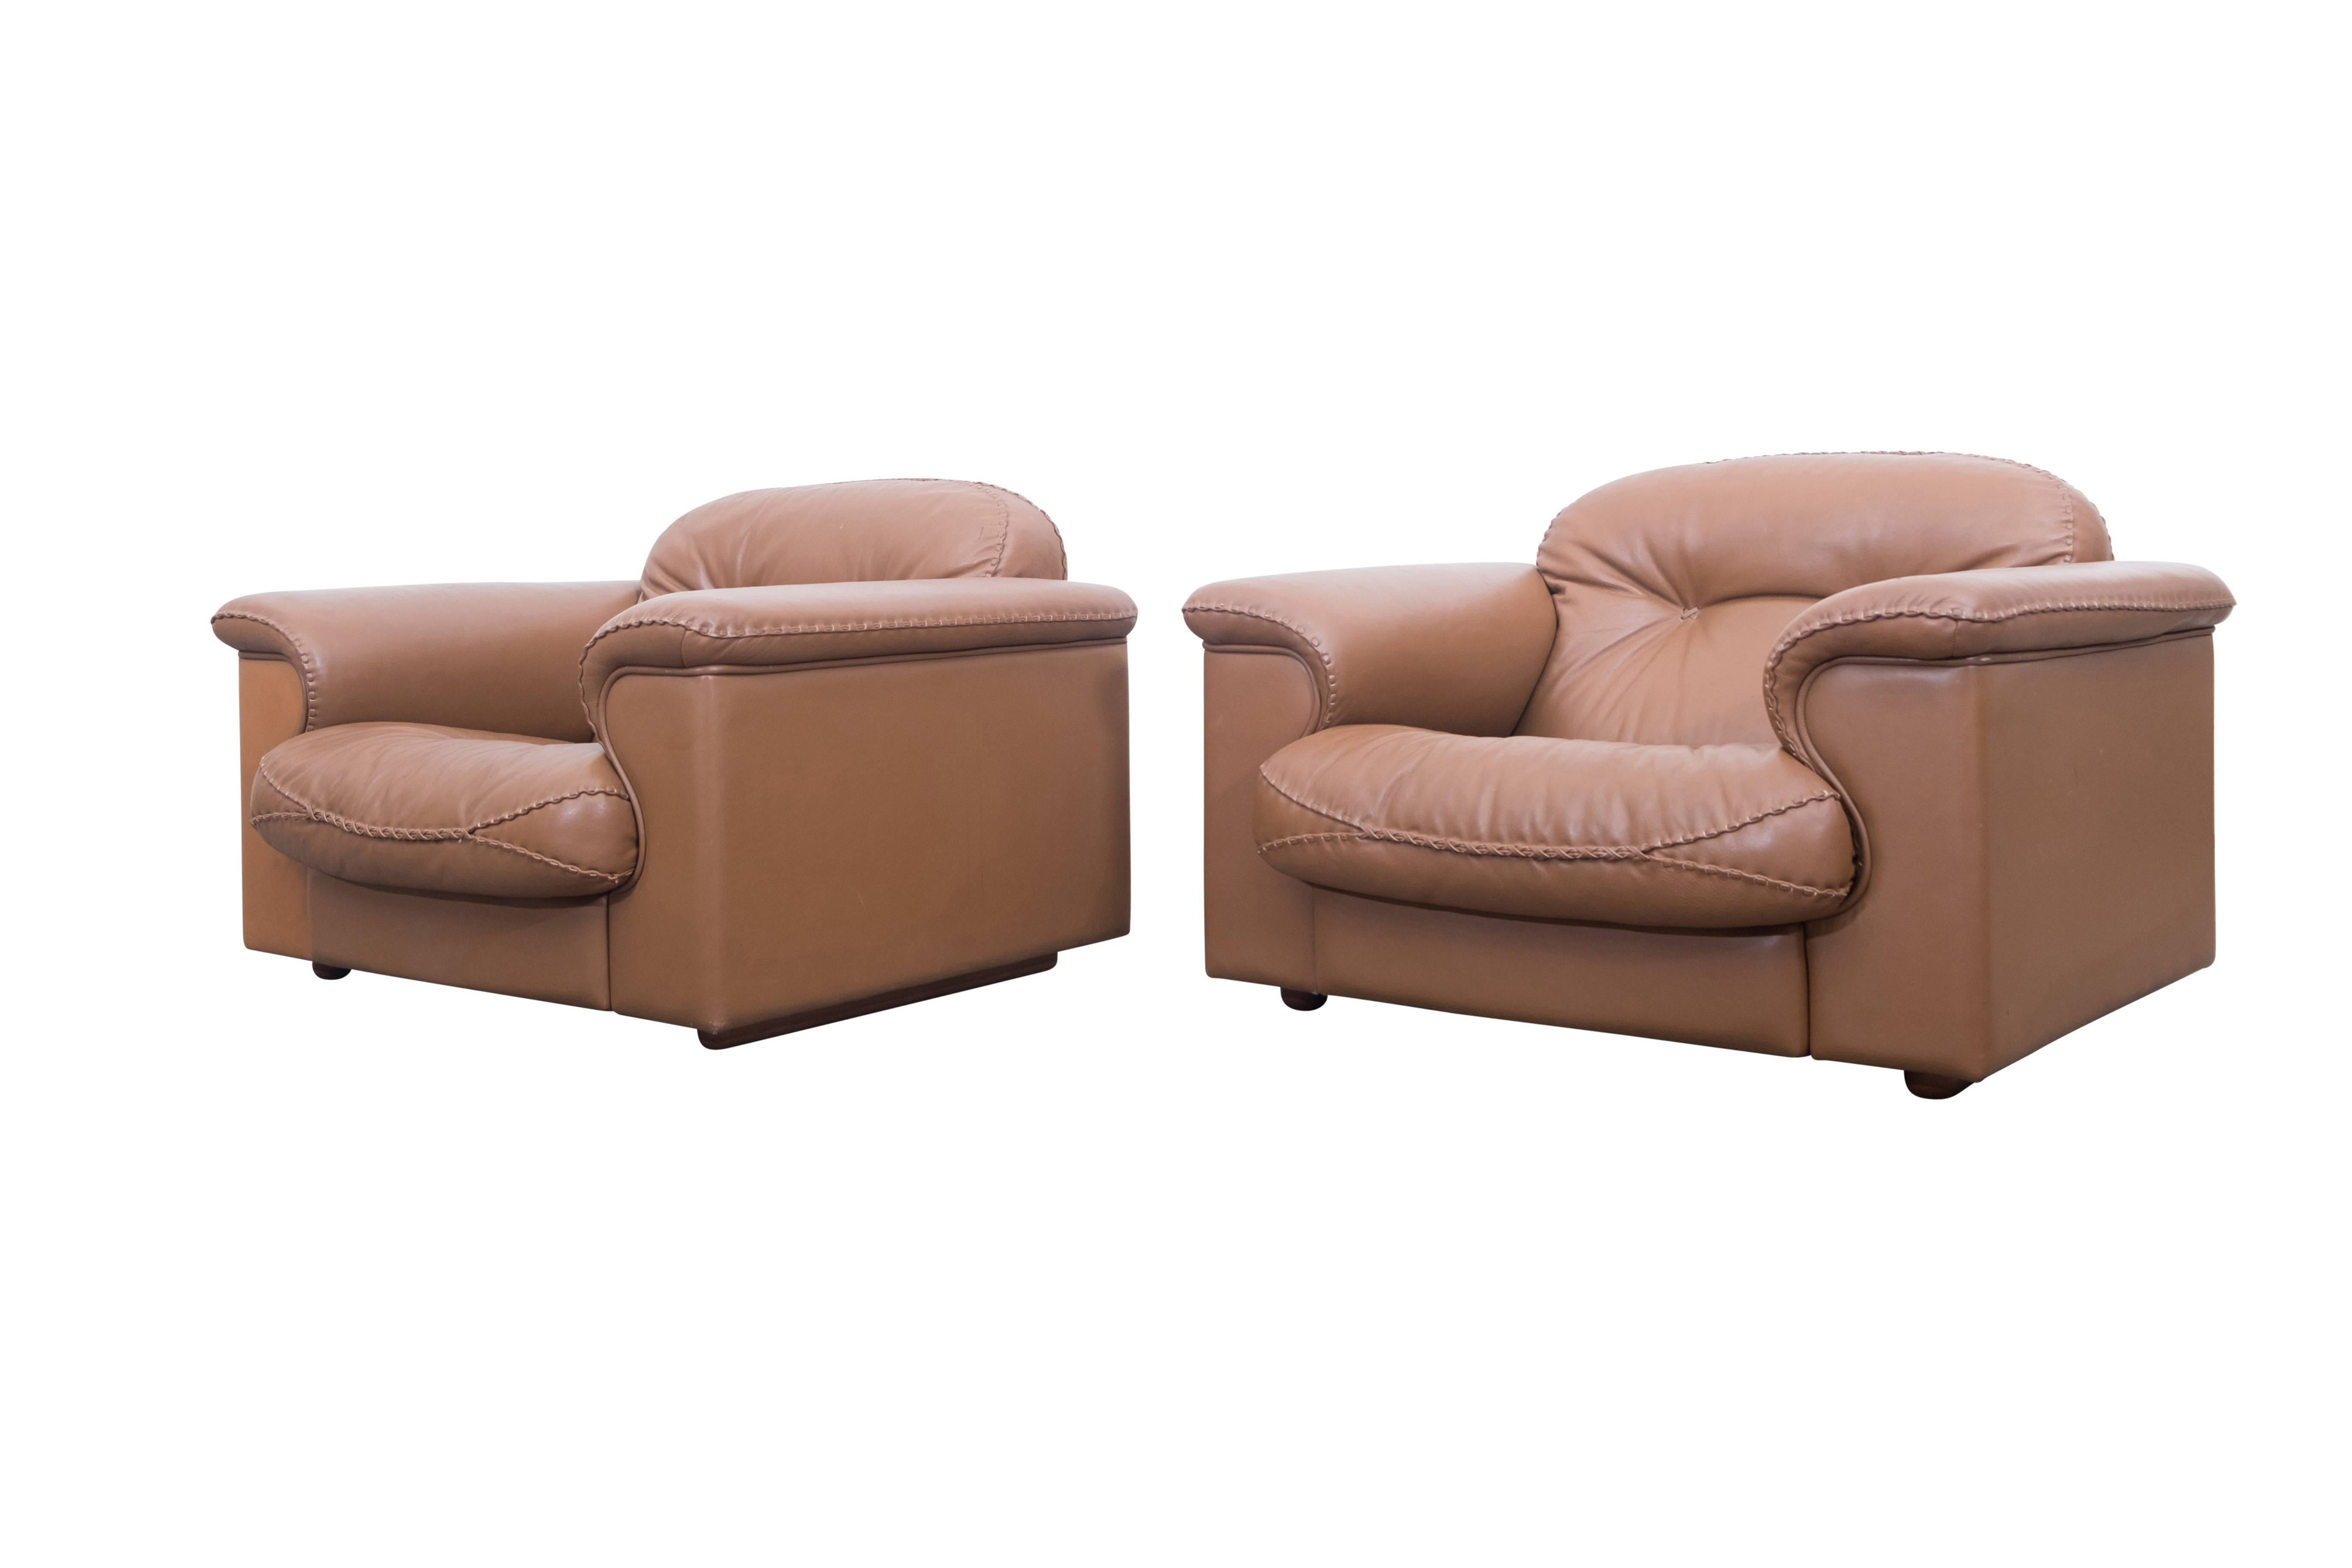 Set of two adjustable DS 101 lounge chairs by De Sede

Adjustable and very comfortable lounge chairs by De Sede, Swiss, 1960s
The chairs are upholstered in very high quality leather and finished with interesting
thick stitched seams.

Side